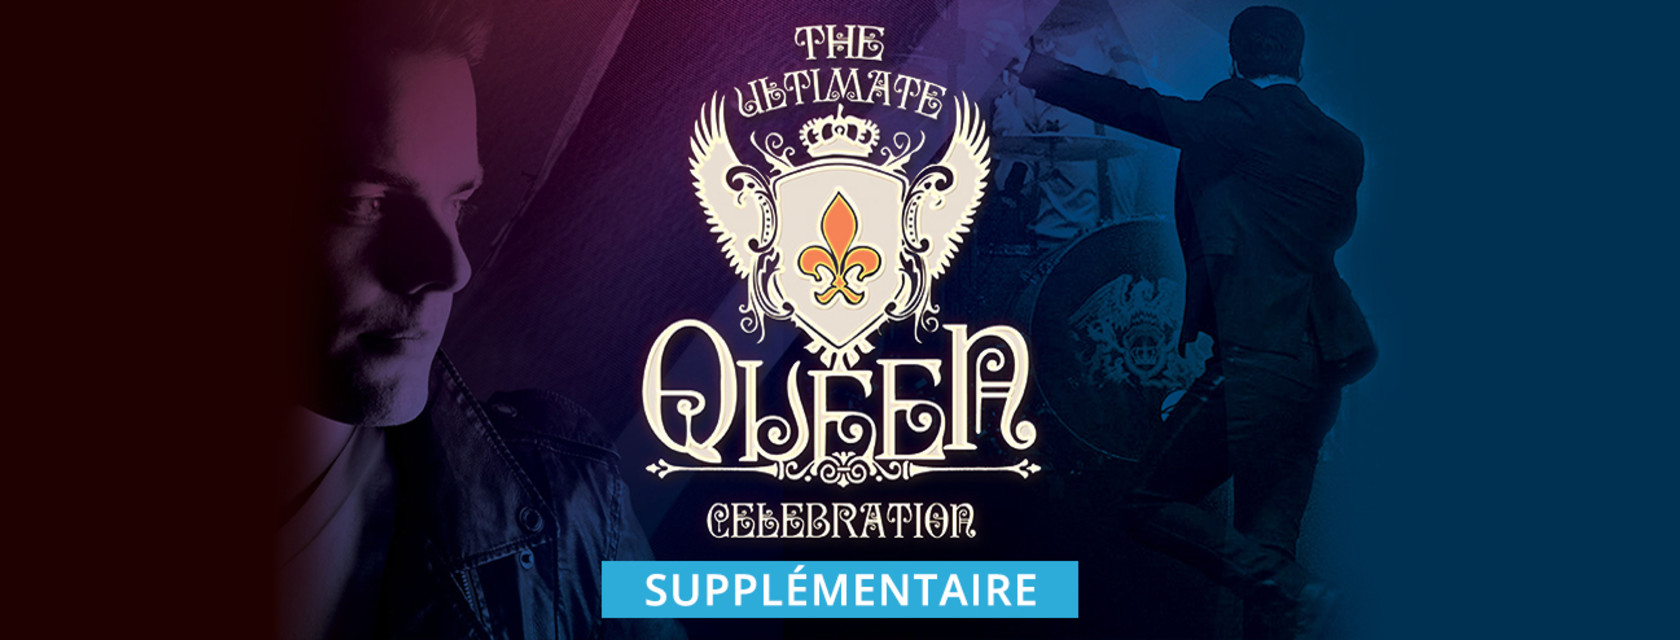 An additional representation for The Ultimate Queen Celebration show